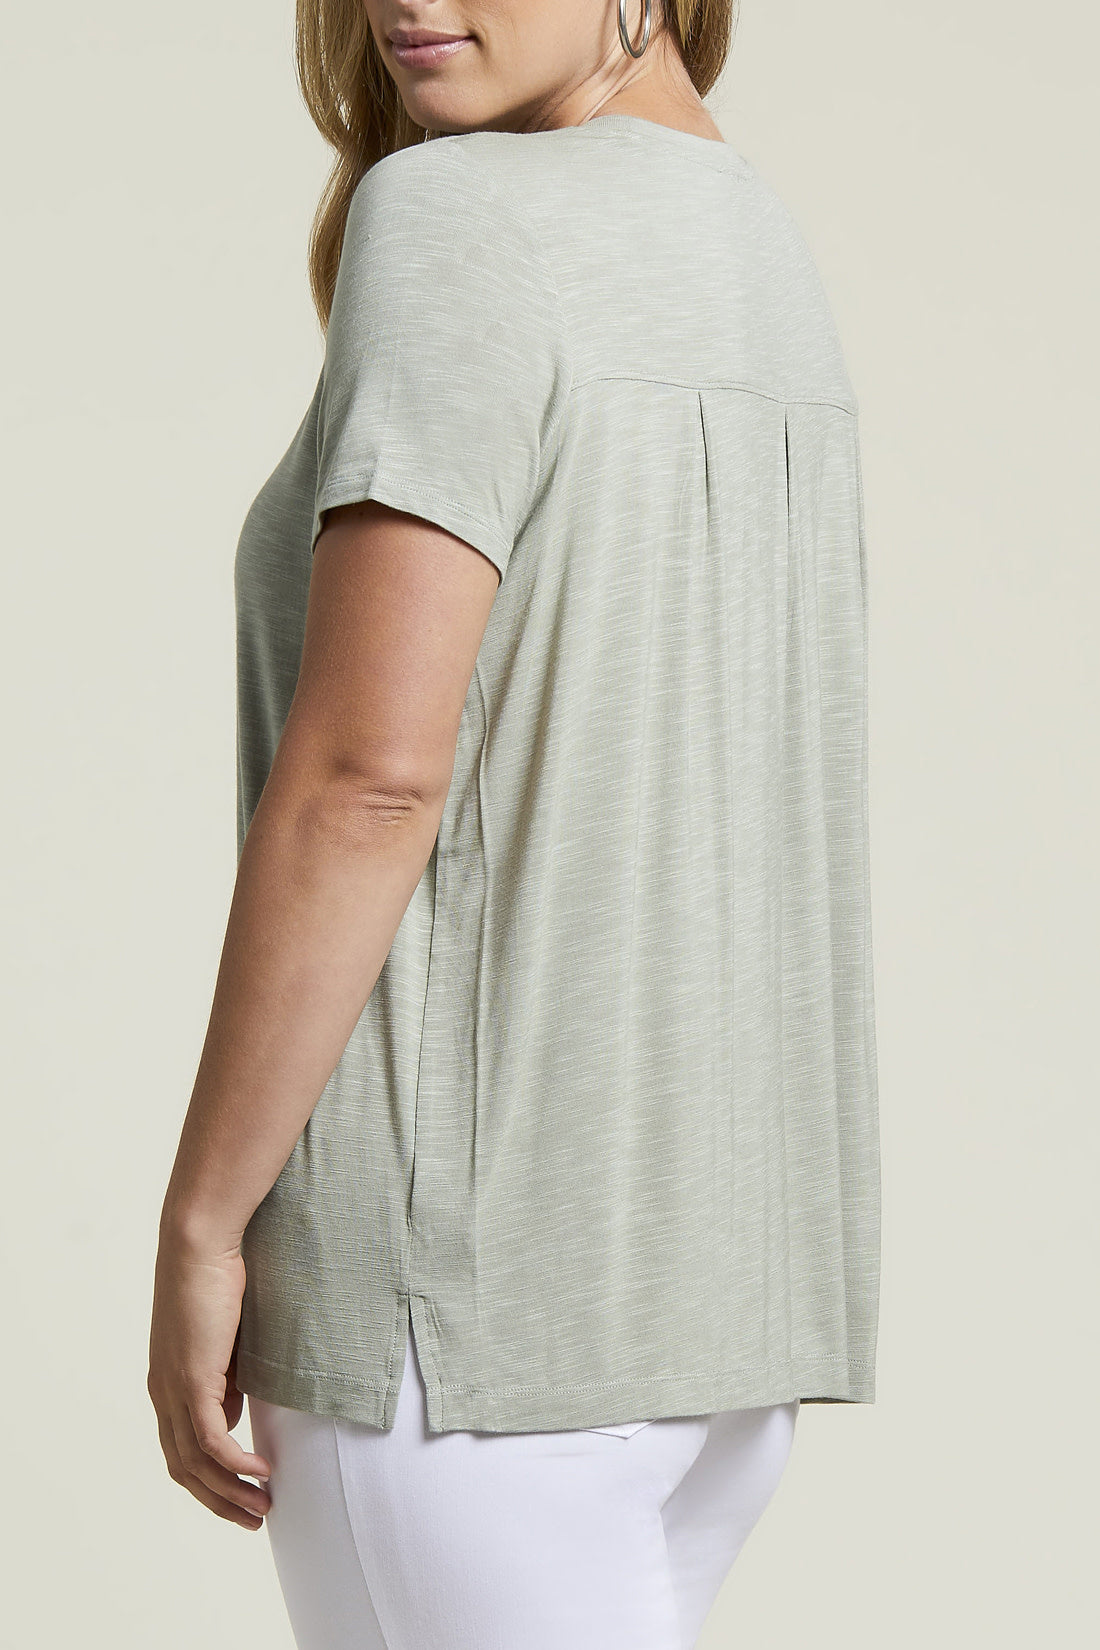 Scoop Neck Top With Back Pleats 1283O